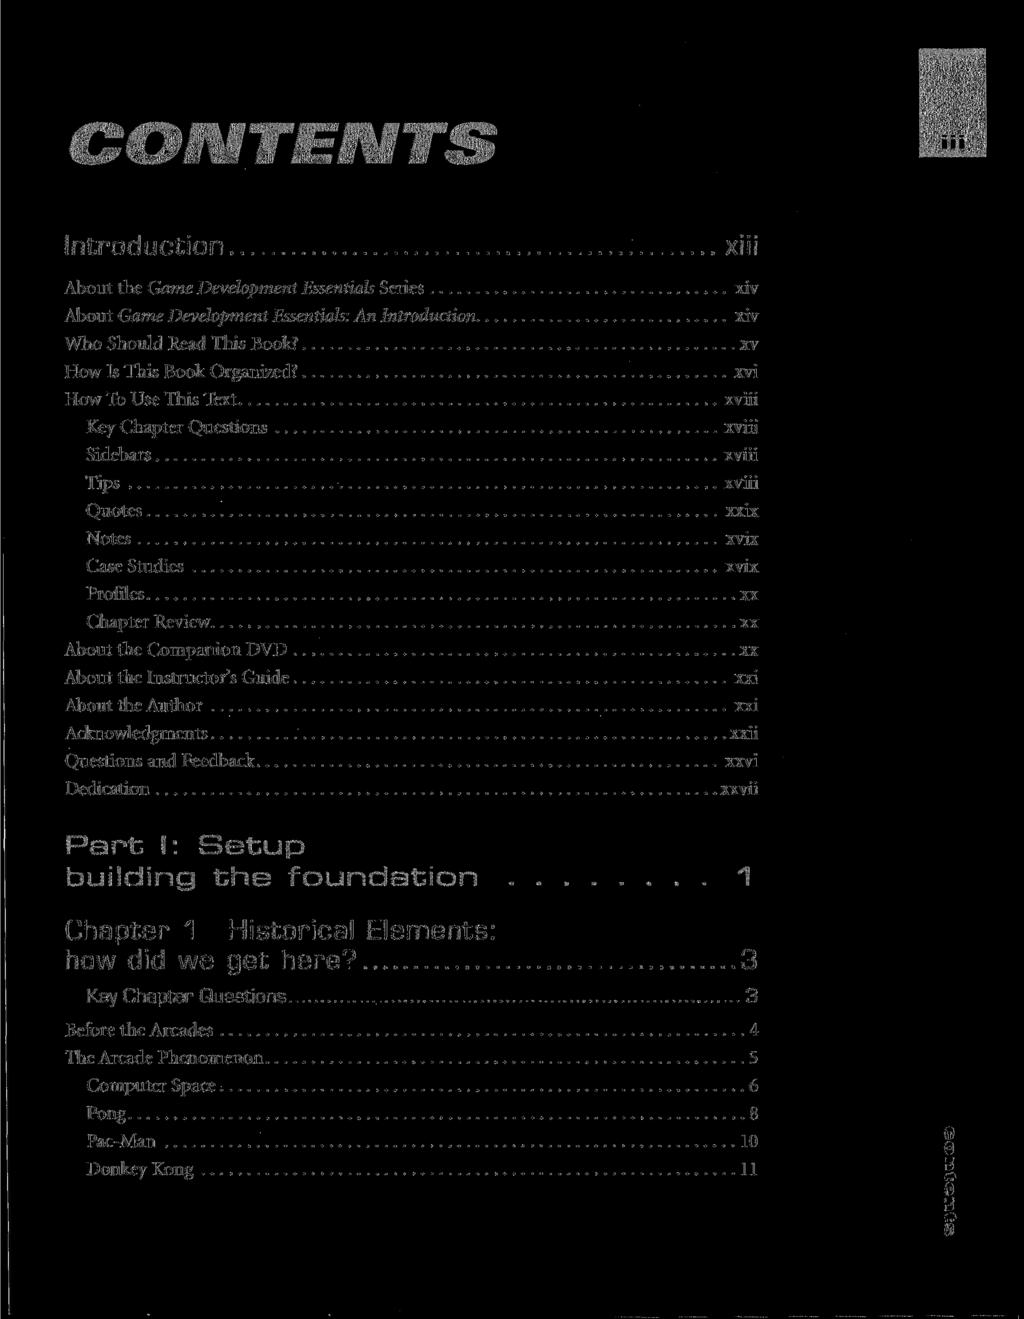 CONTENTS Introduction About the Game Development Essentials Series About Game Development Essentials: An Introduction Who Should Read This Book? How Is This Book Organized?